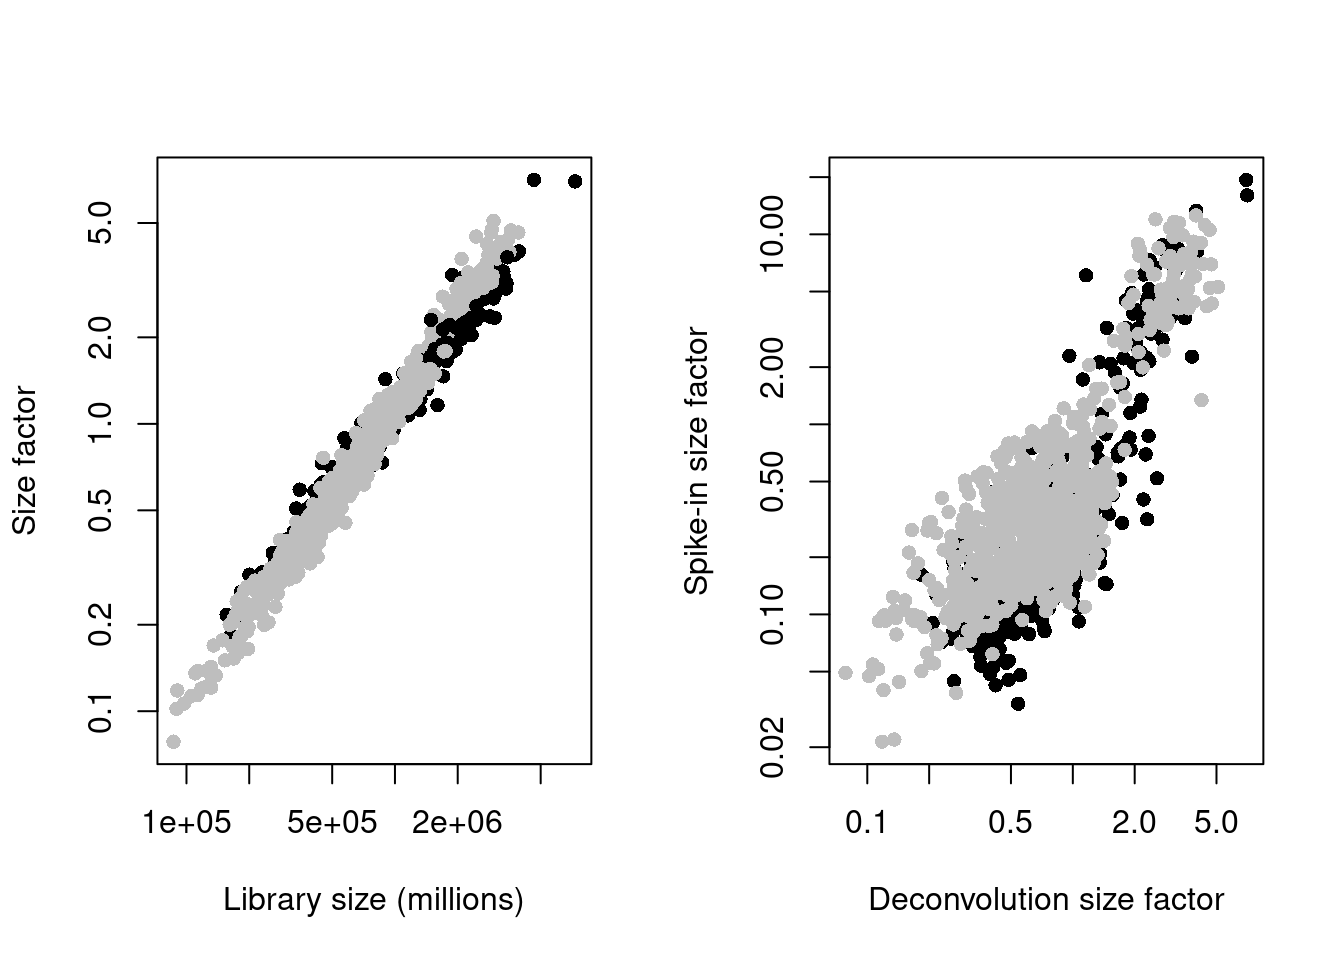 Deconvolution size factors plotted against the library size (left) and spike-in size factors plotted against the deconvolution size factors (right). Each point is a cell and is colored by its phenotype.